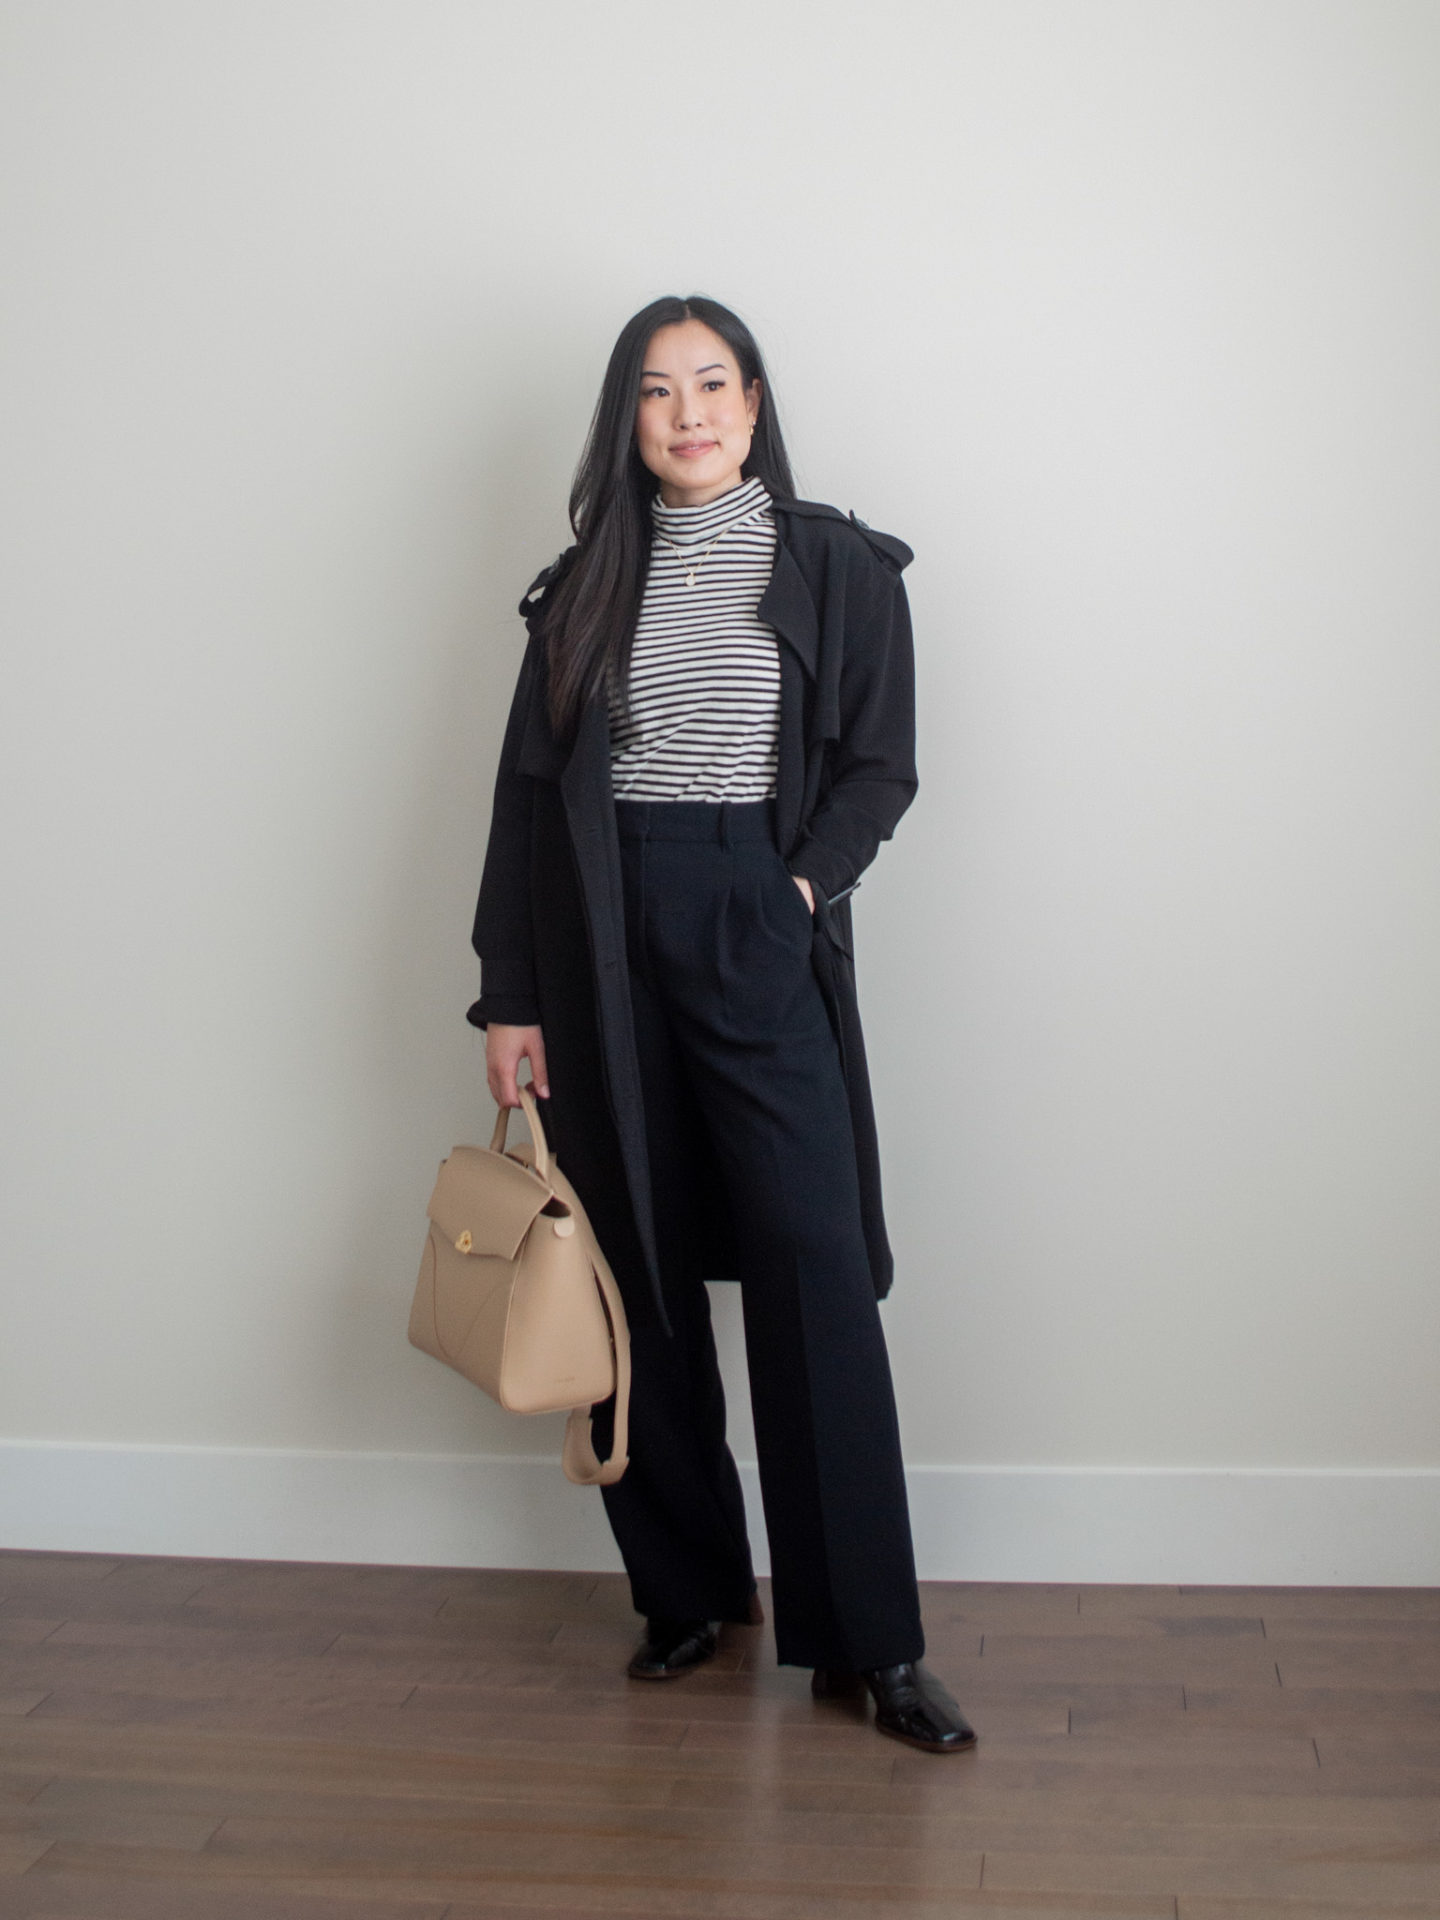 Her Simple Sole - About Me, black trench coat outfit, stripe turtleneck smart casual outfit